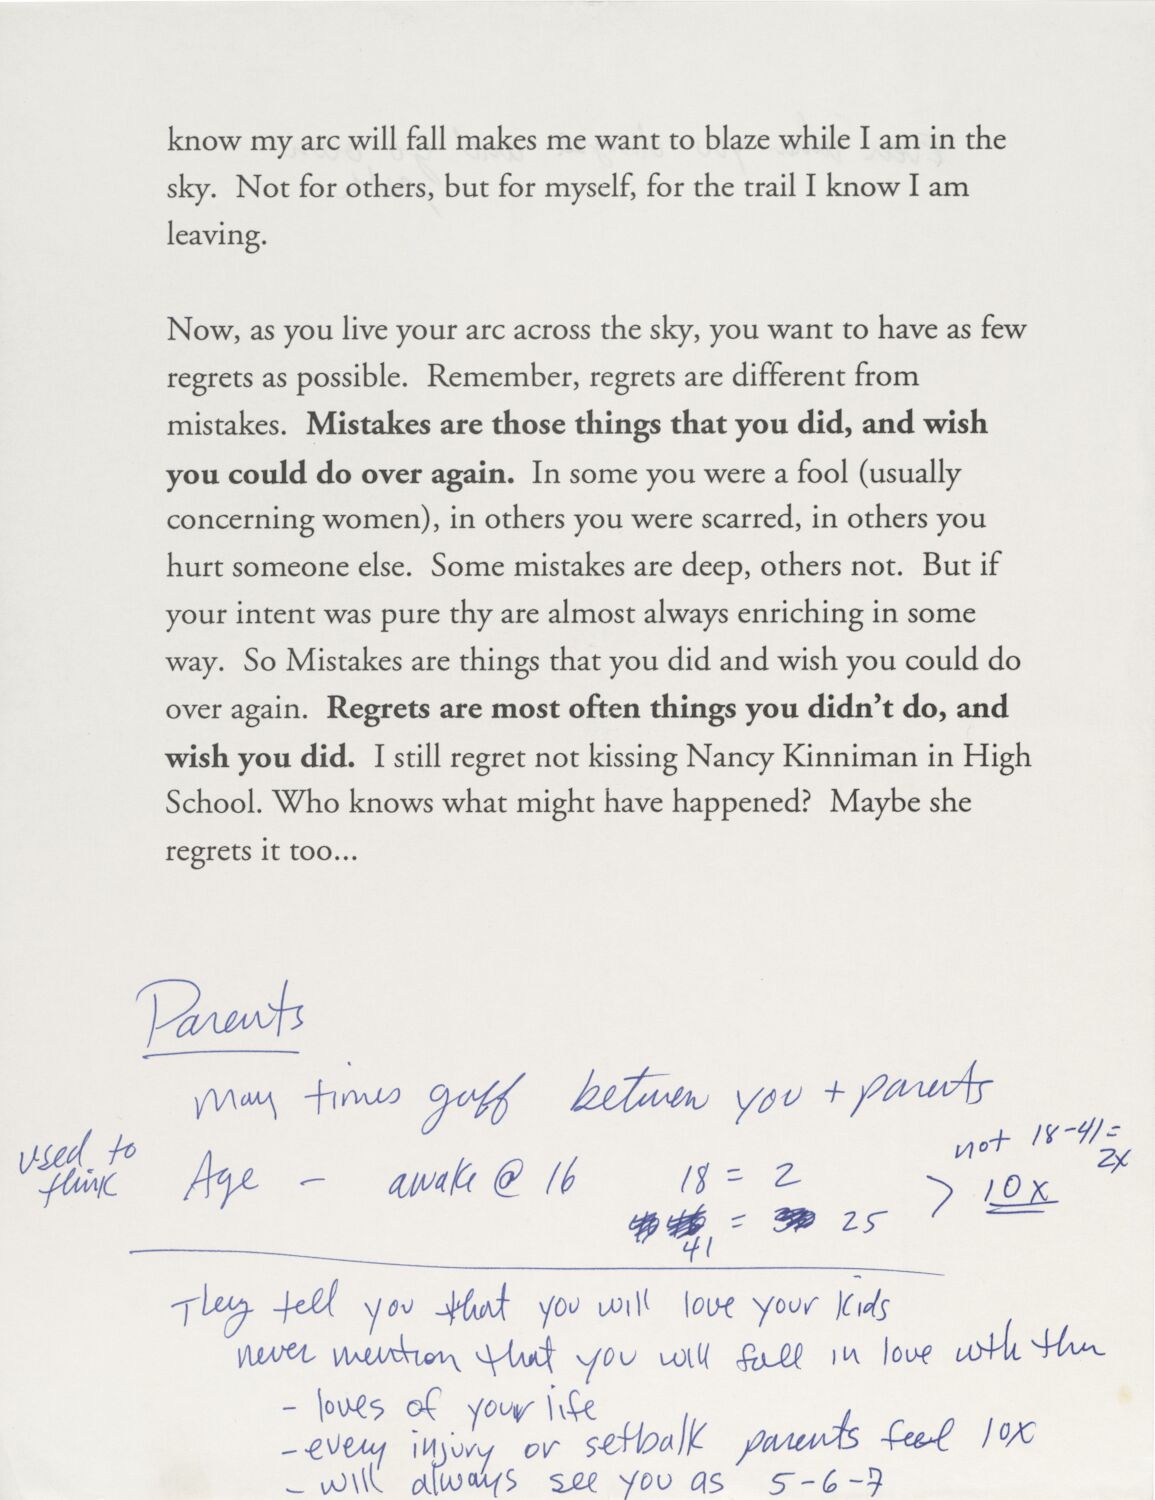 A typed page from a speech at Palo Alto High School, with handwritten notes strewn across the bottom in blue ink.